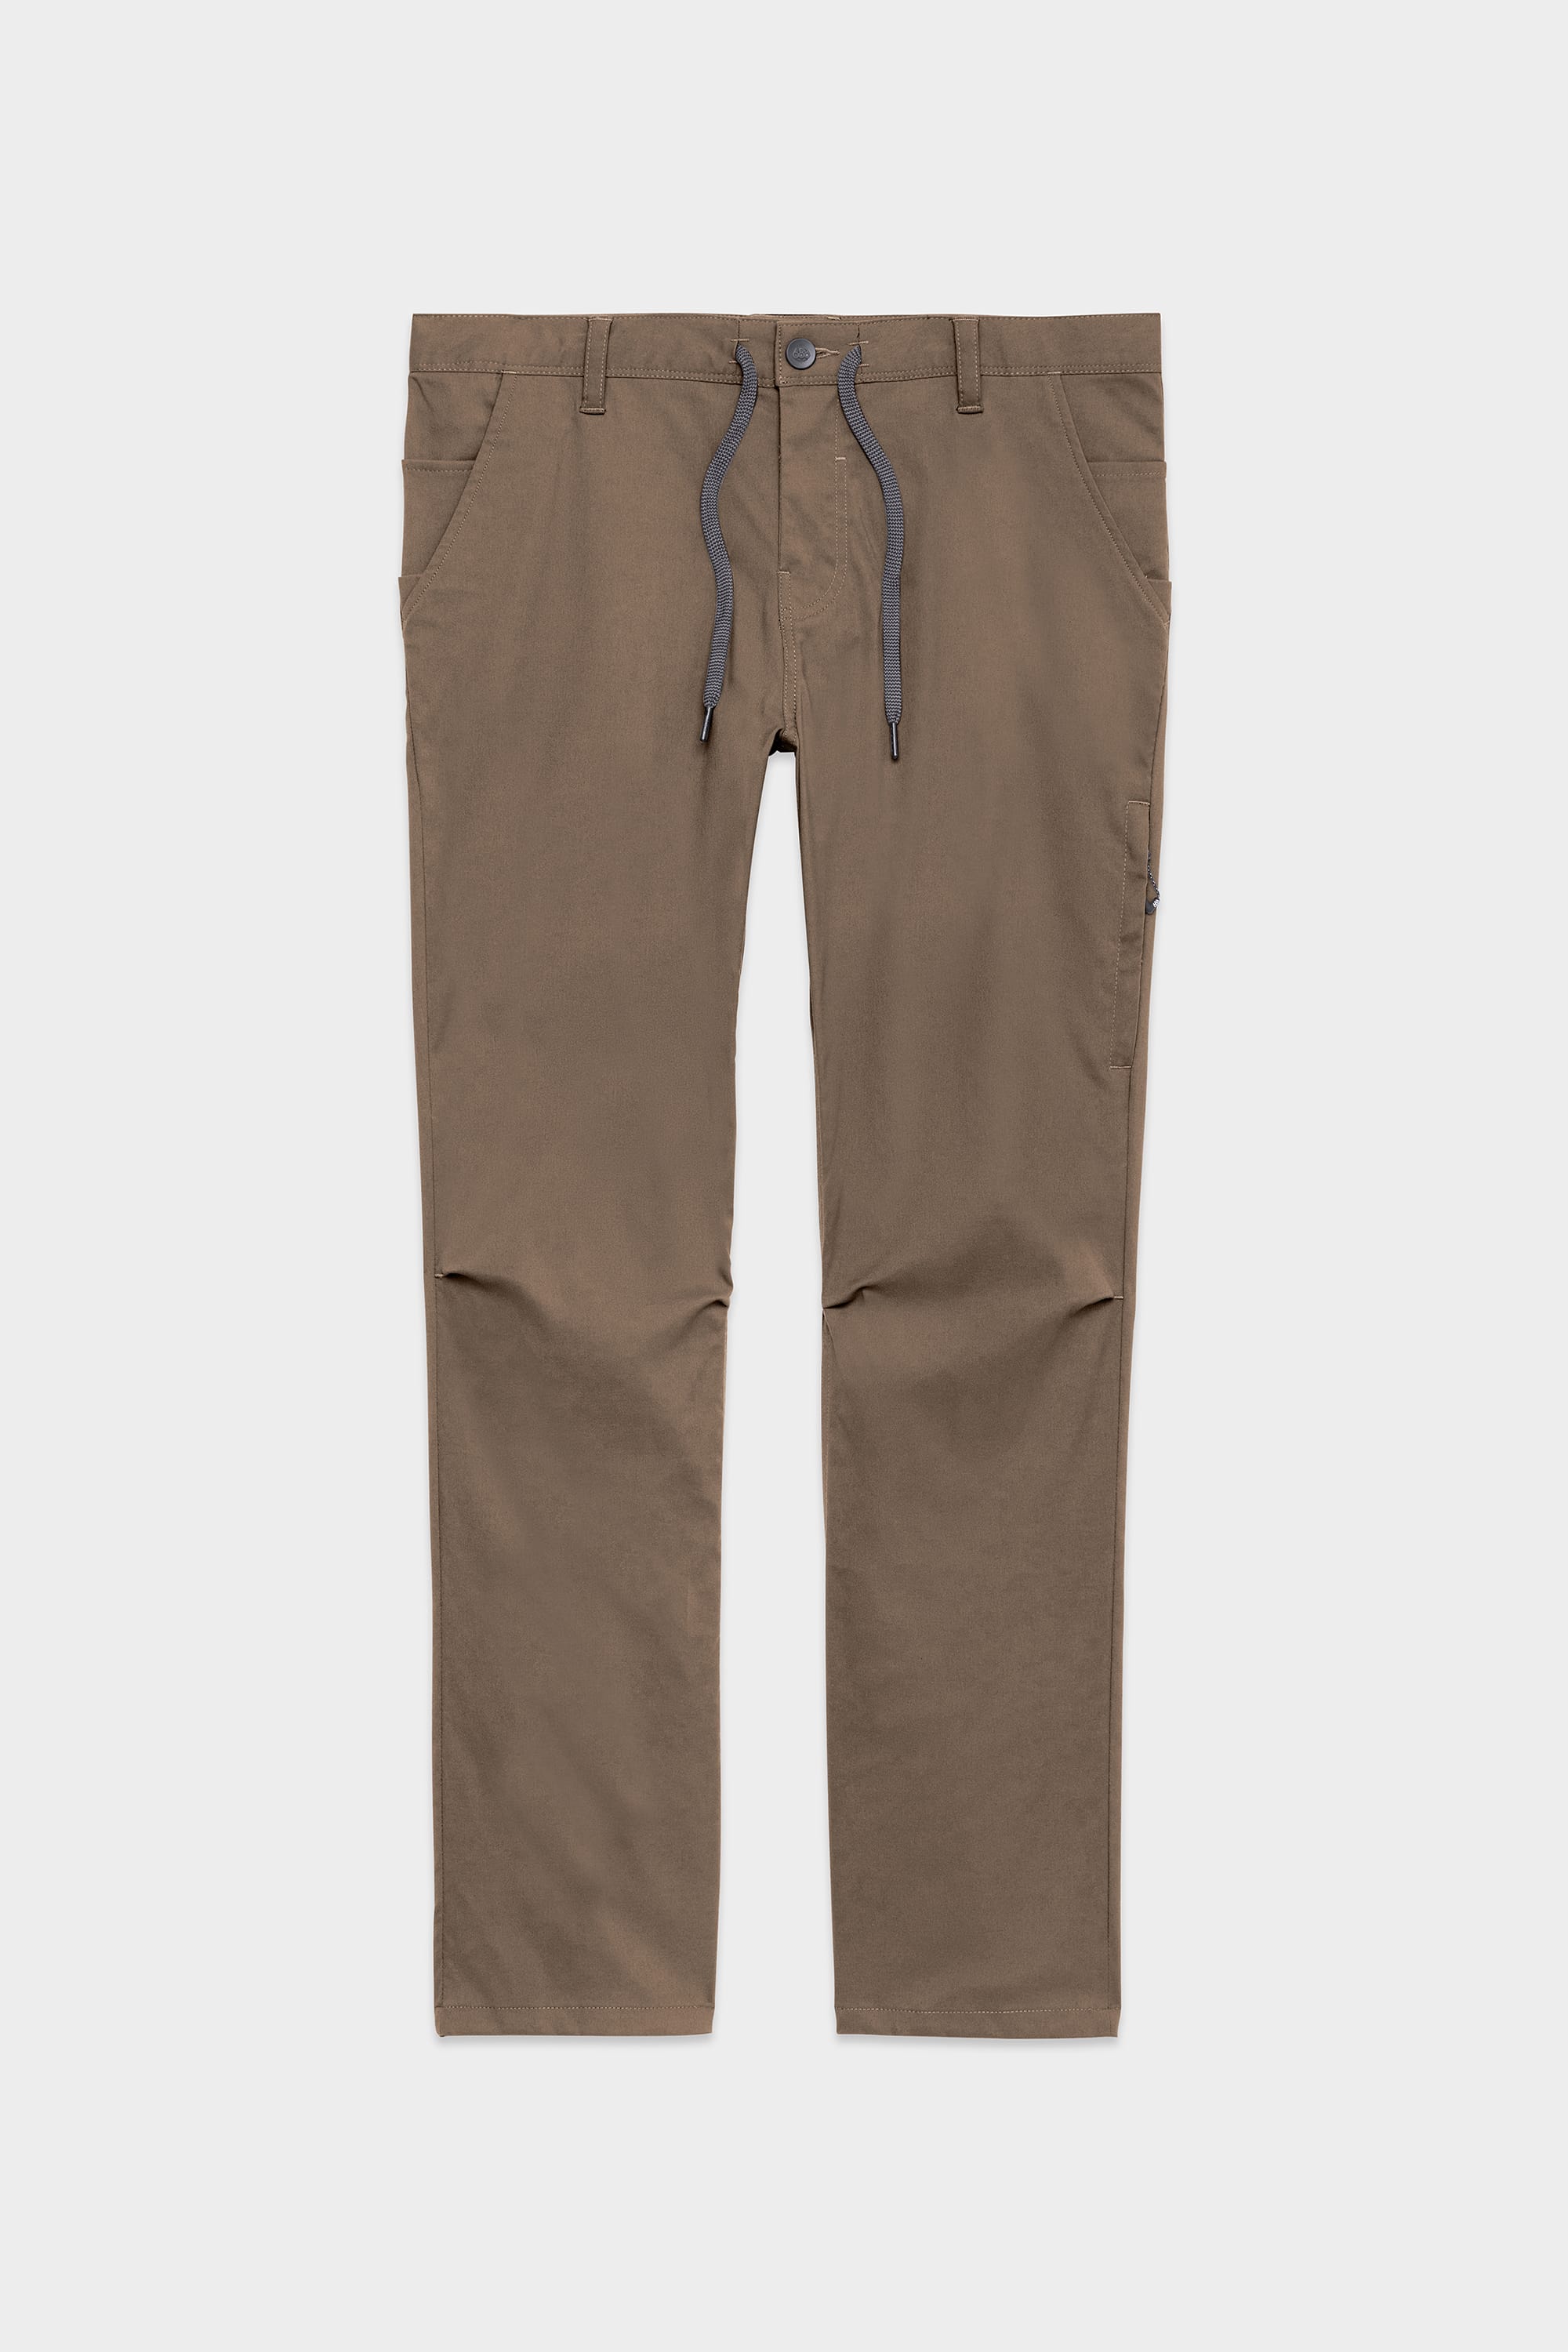 686 Everywhere Pant - Relax Fit Men's